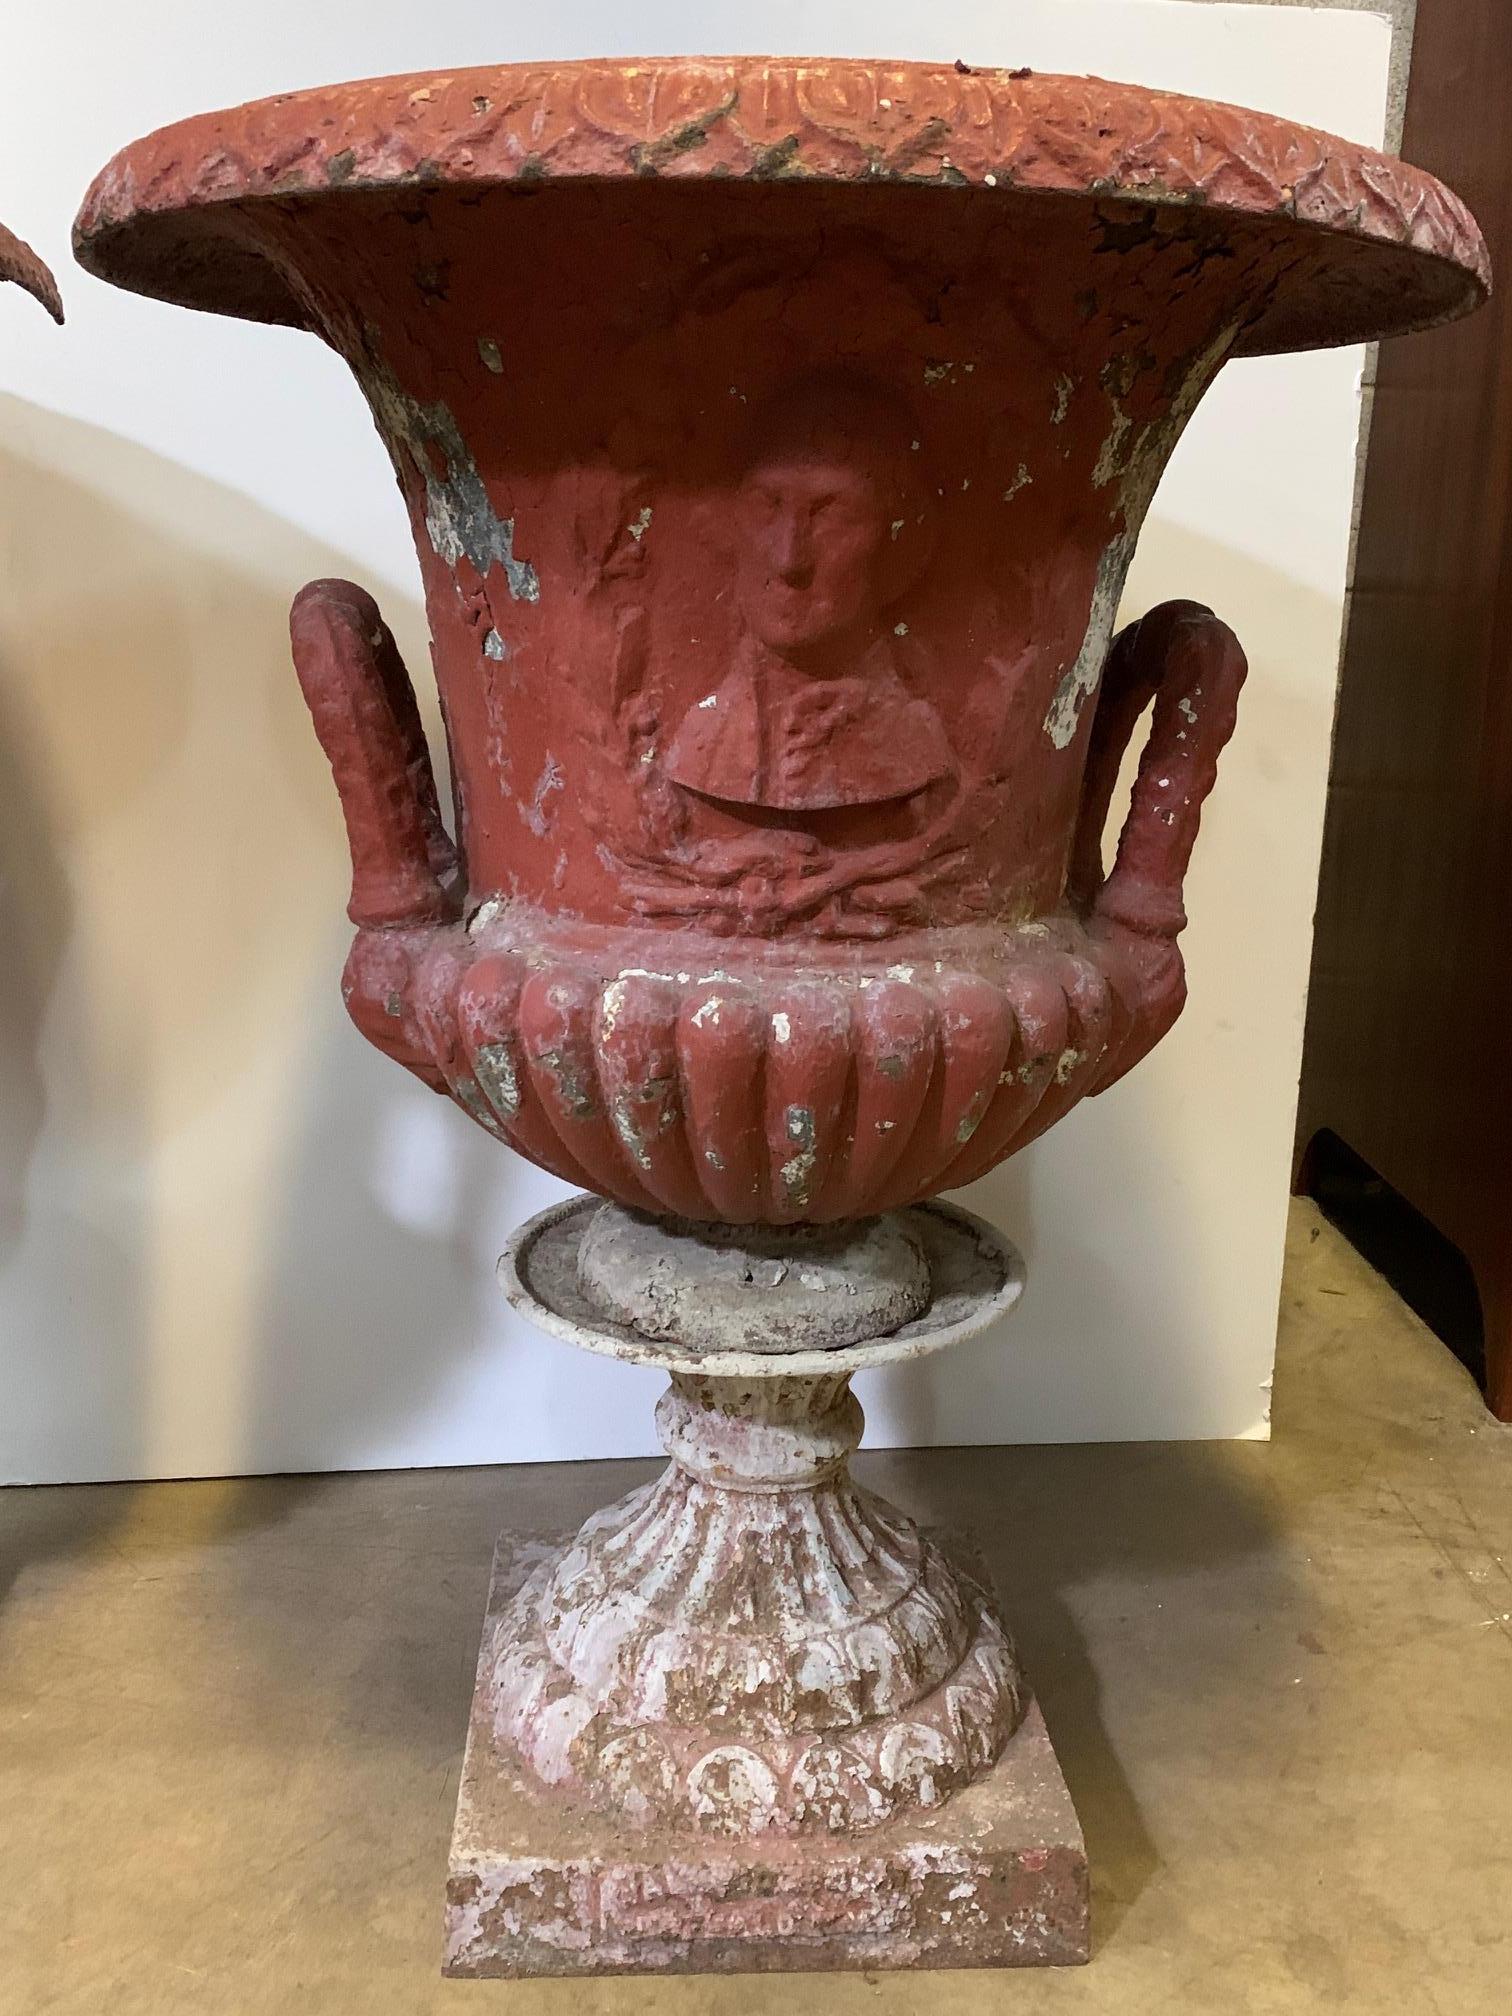 A large pair of American garden cast iron urns with a plaque of George Washington in a beautiful weathered red painted finish. 
The urns depict the first President of the United States , perfect for a historical home or anyone who is a fan of